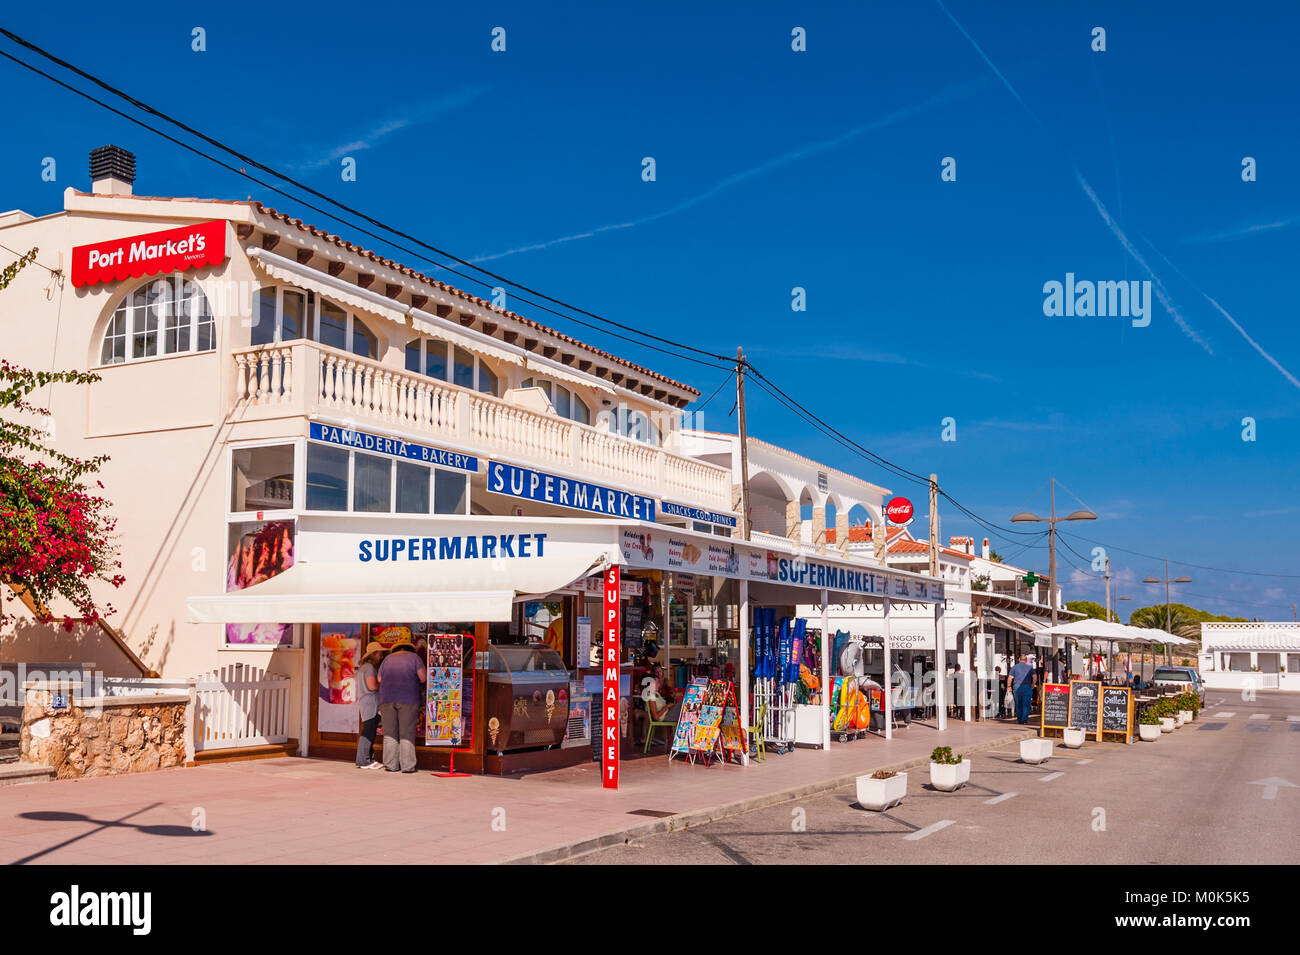 The local supermarket and stores at Punta Prima , Menorca , Balearic Islands , Spain Stock Photo